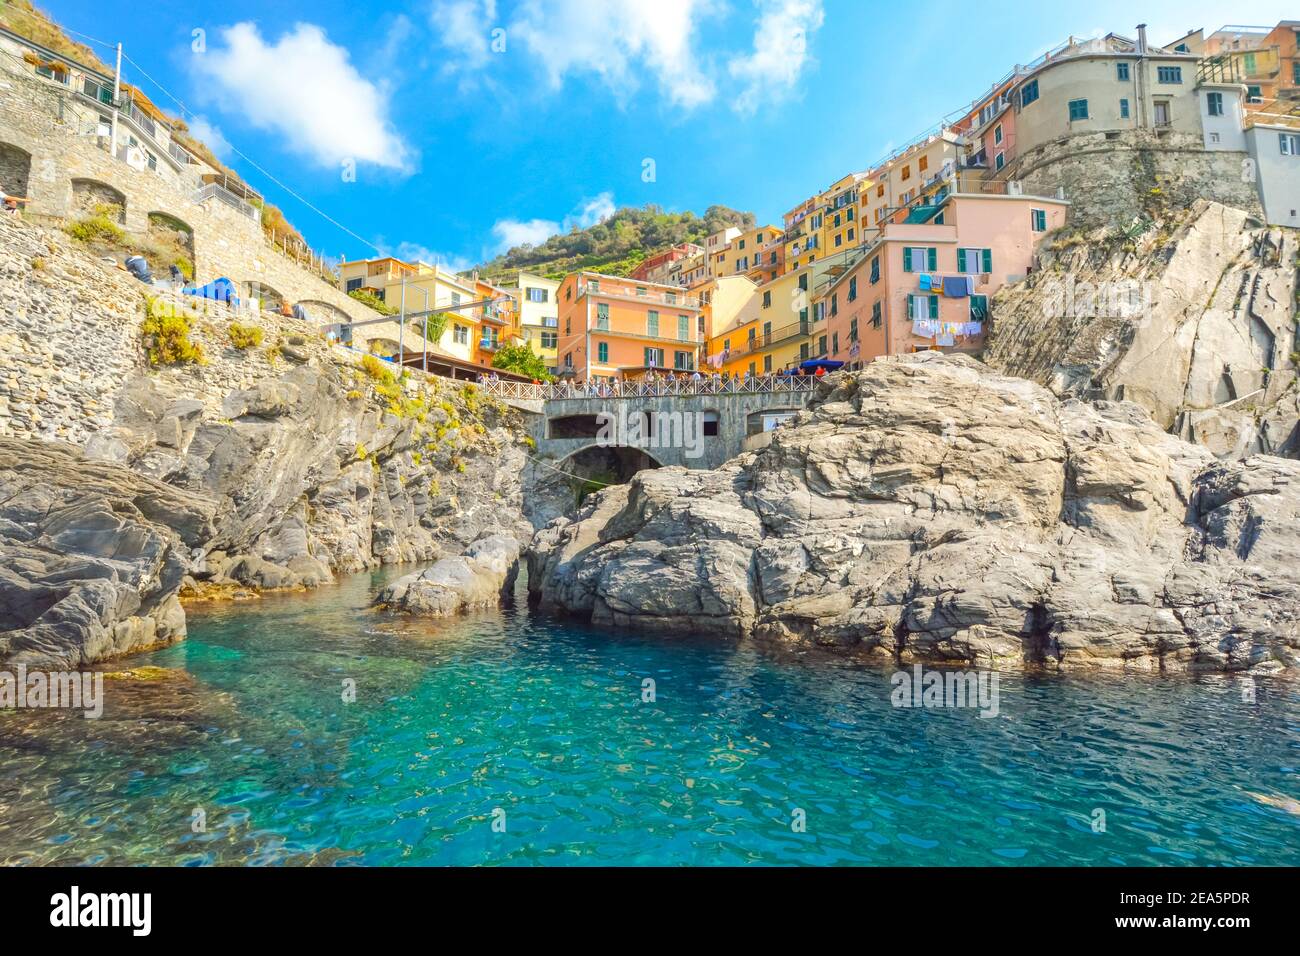 The rocky coastline and swimming bay on the Ligurian Coast of Italy at the village of Manarola, Italy, part of the Cinque Terre, an Unesco site Stock Photo